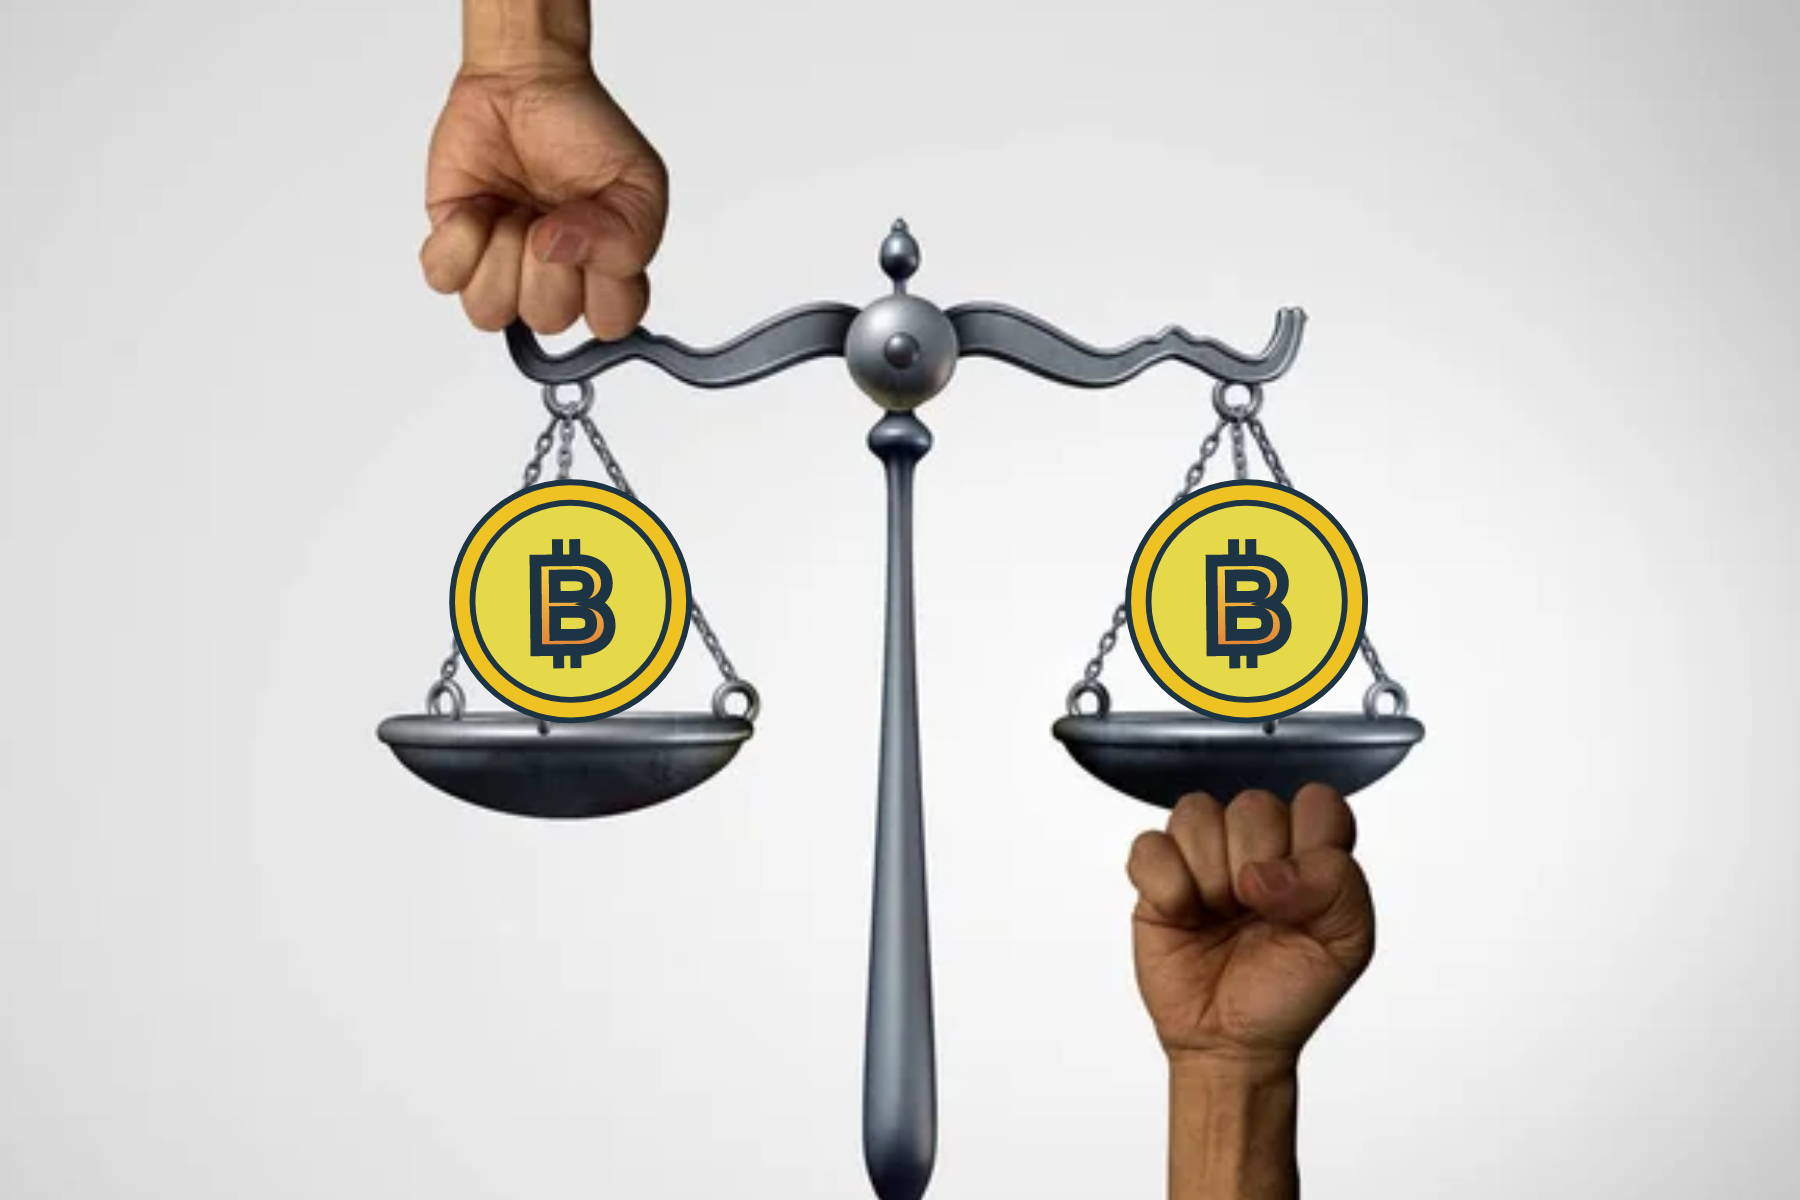 A scale with two Bitcoins of equal weight on each side